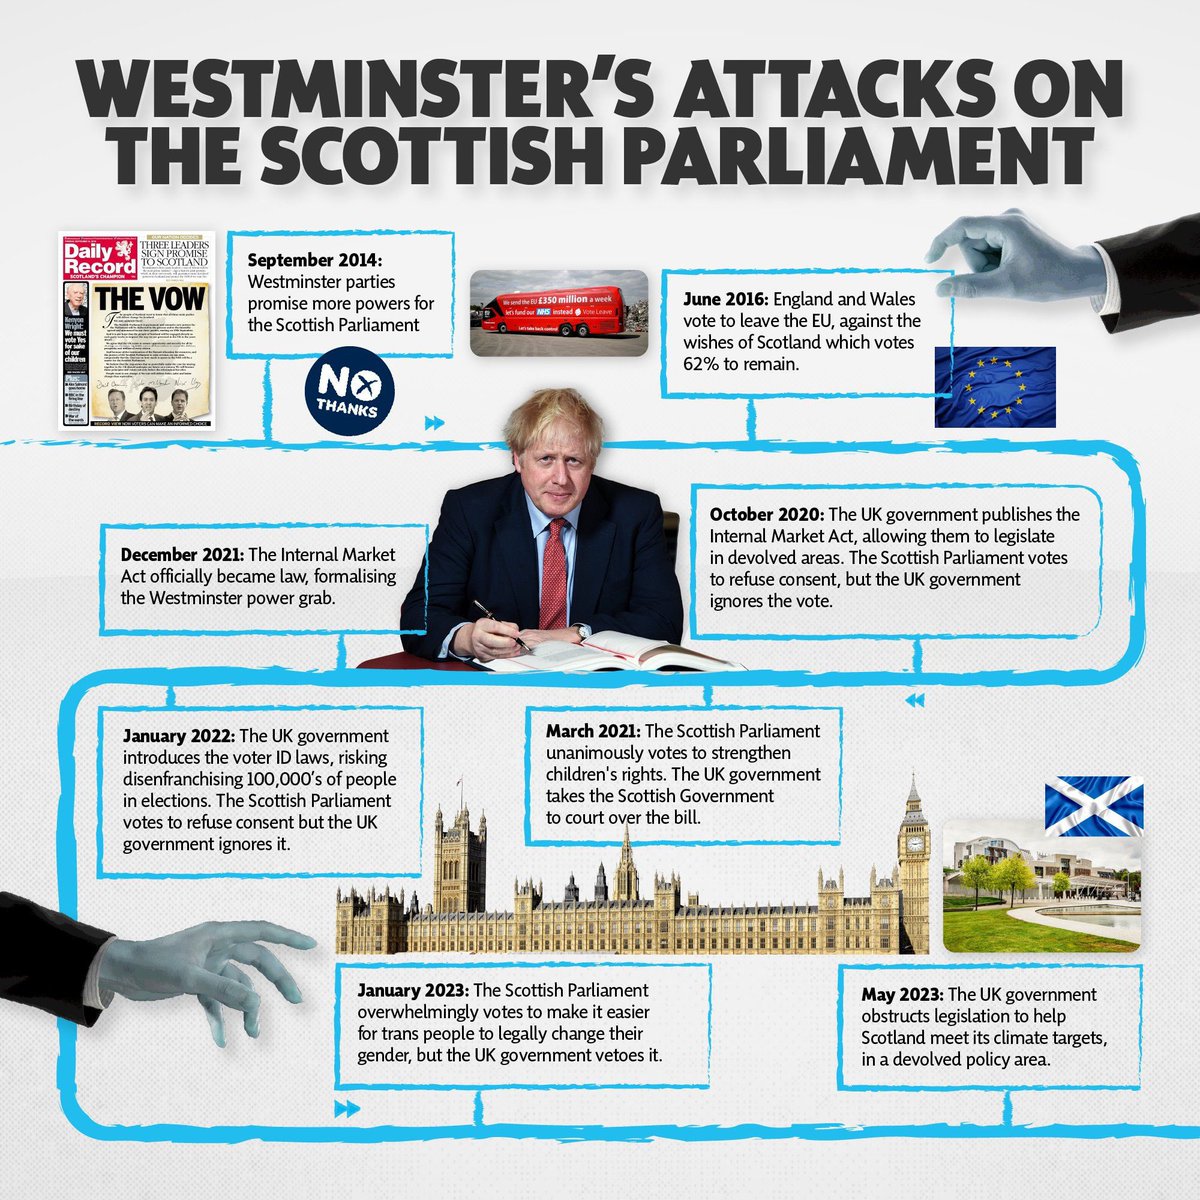 2/3 The undermining of devolution by the Tory UK Government matters. They have given themselves the power and ability to push their agenda for areas like healthcare and water services in Scotland under the guise of supposed UK wide market rules. gov.scot/publications/d…